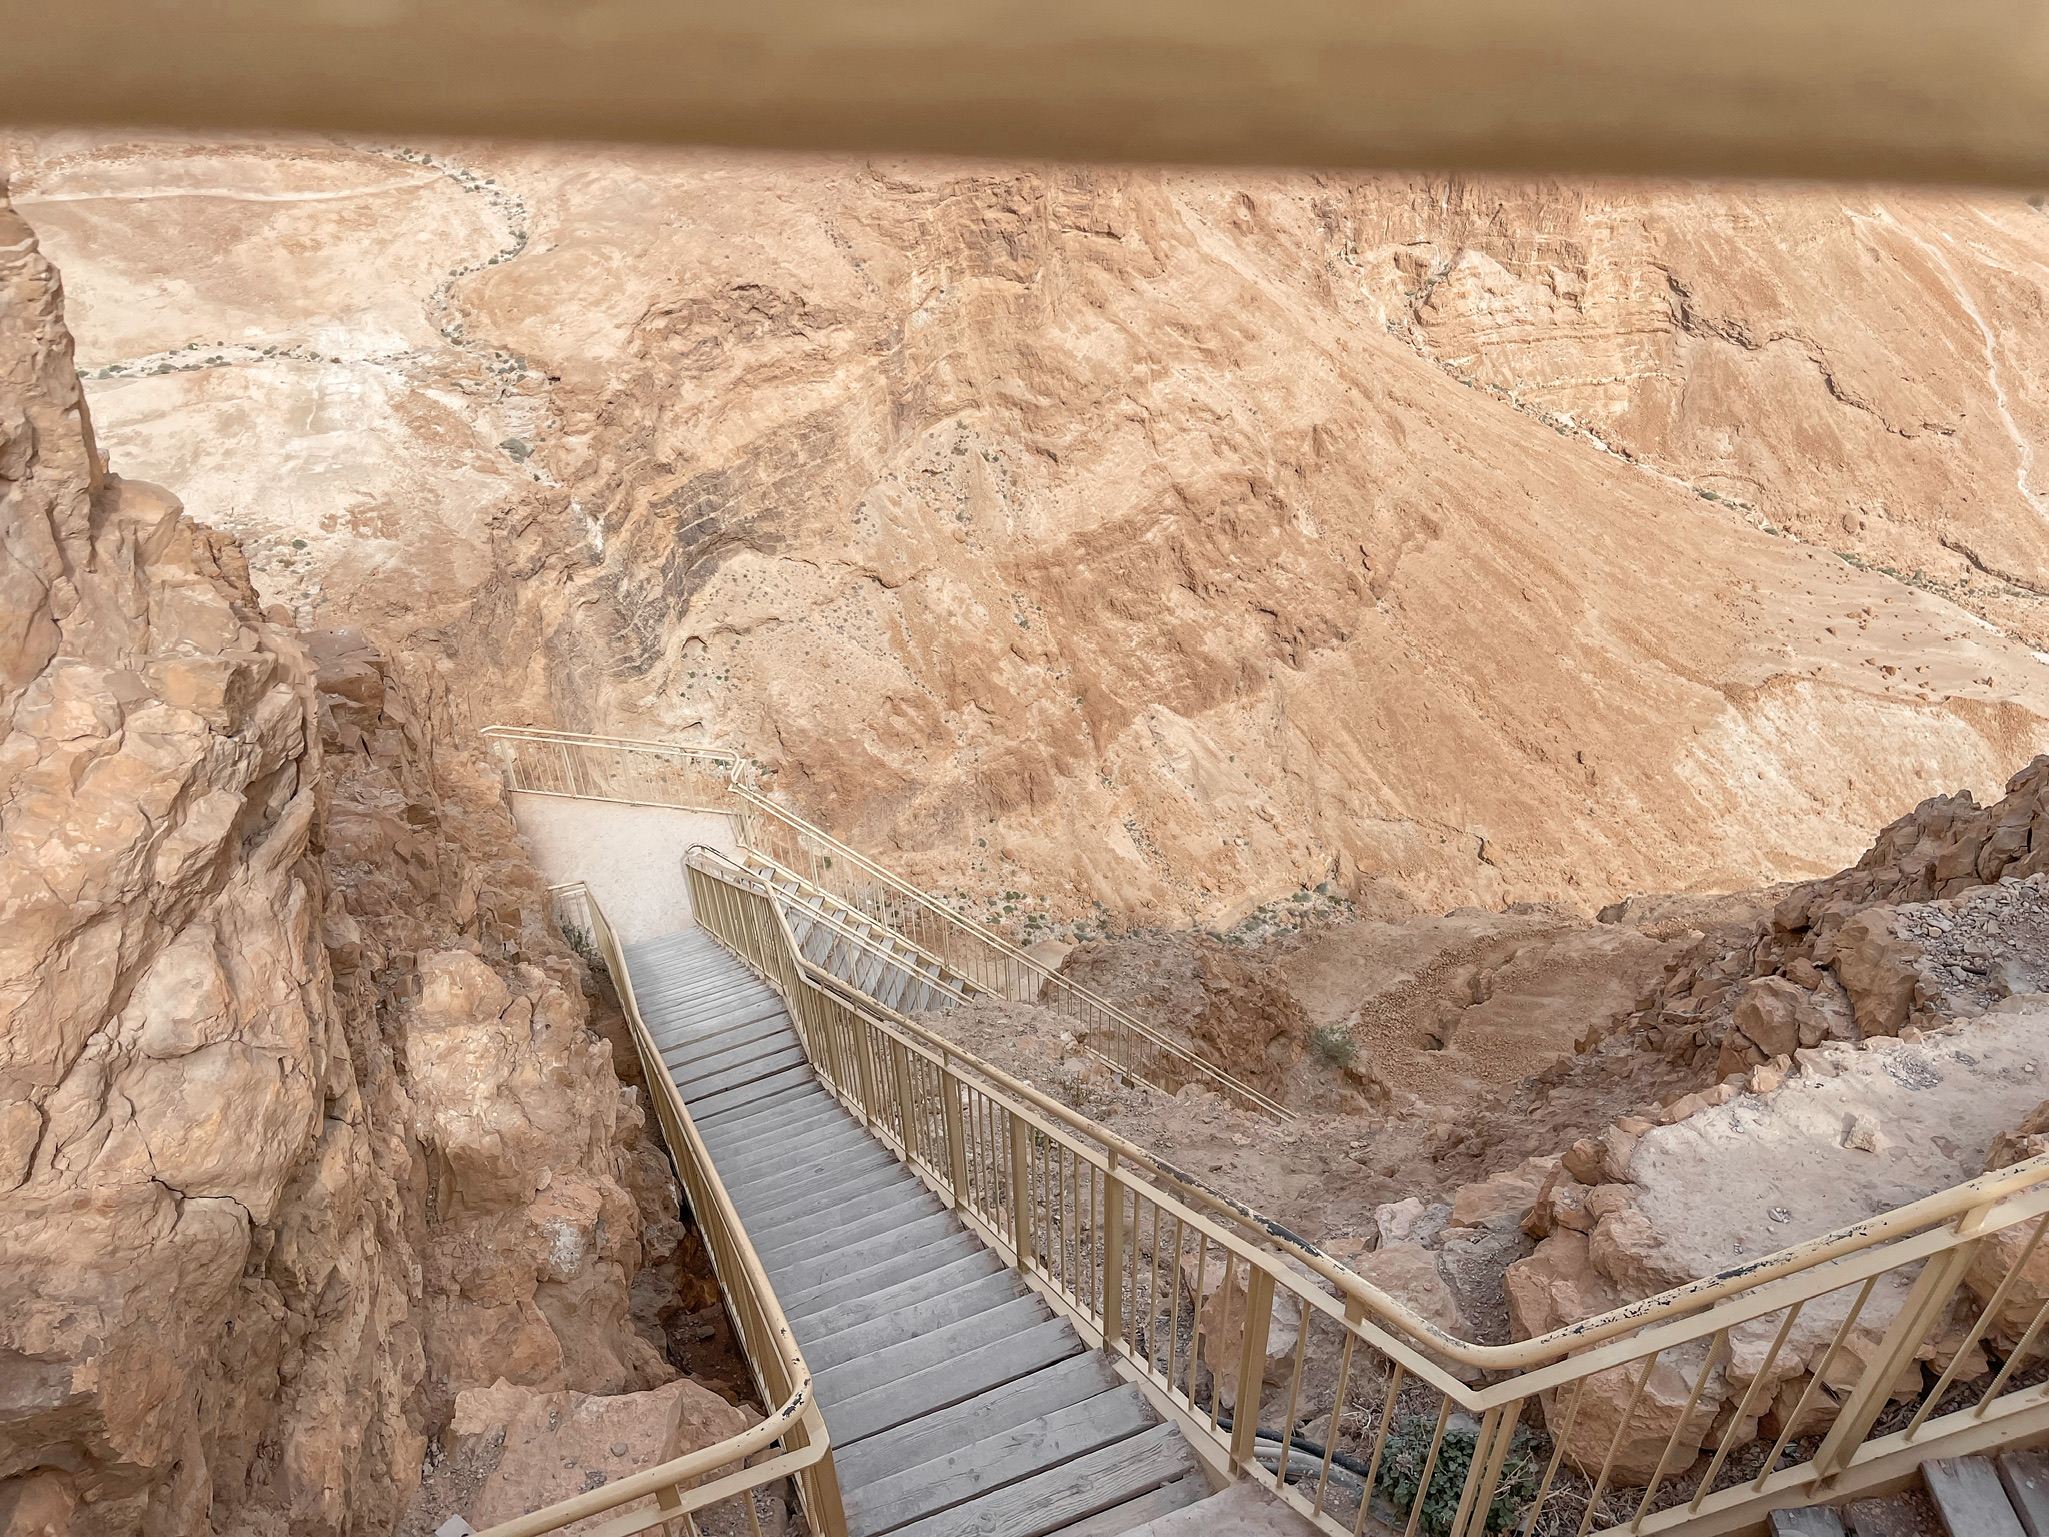 planning a trip to the middle east, where to go in the middle east, how to plan a trip to the middle east, Masada National Park, Israel, erin busbee, busbee style, busbee family travels, Masada National Park trip, snake path, hiking in masada, hiking the snake path